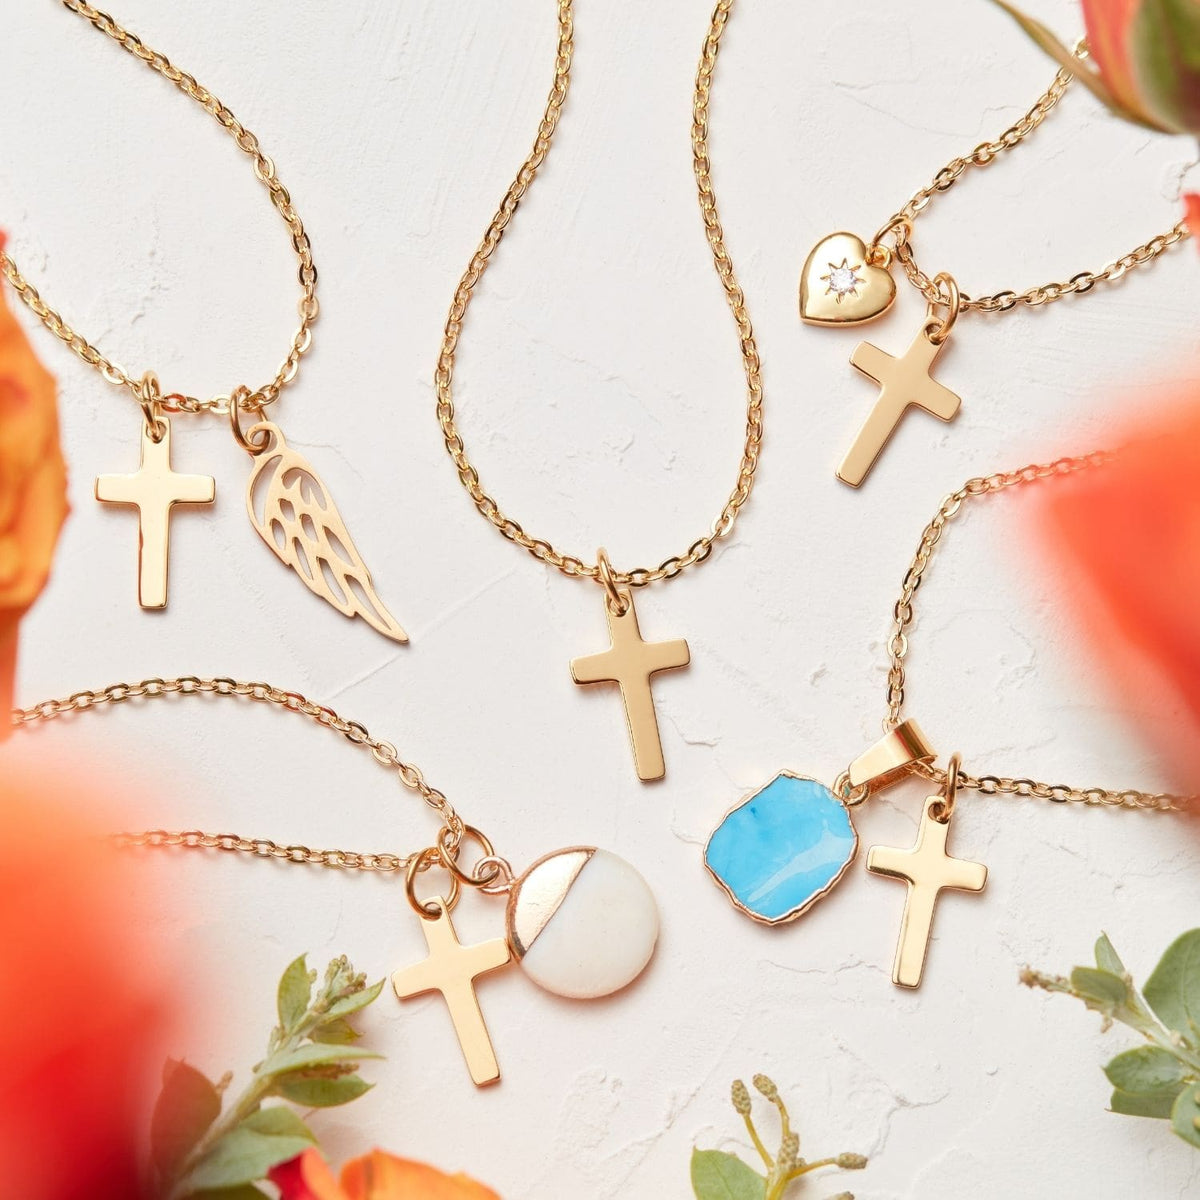 In Loving Memory of your Mom | Her Memory a Treasure | Cross Necklace